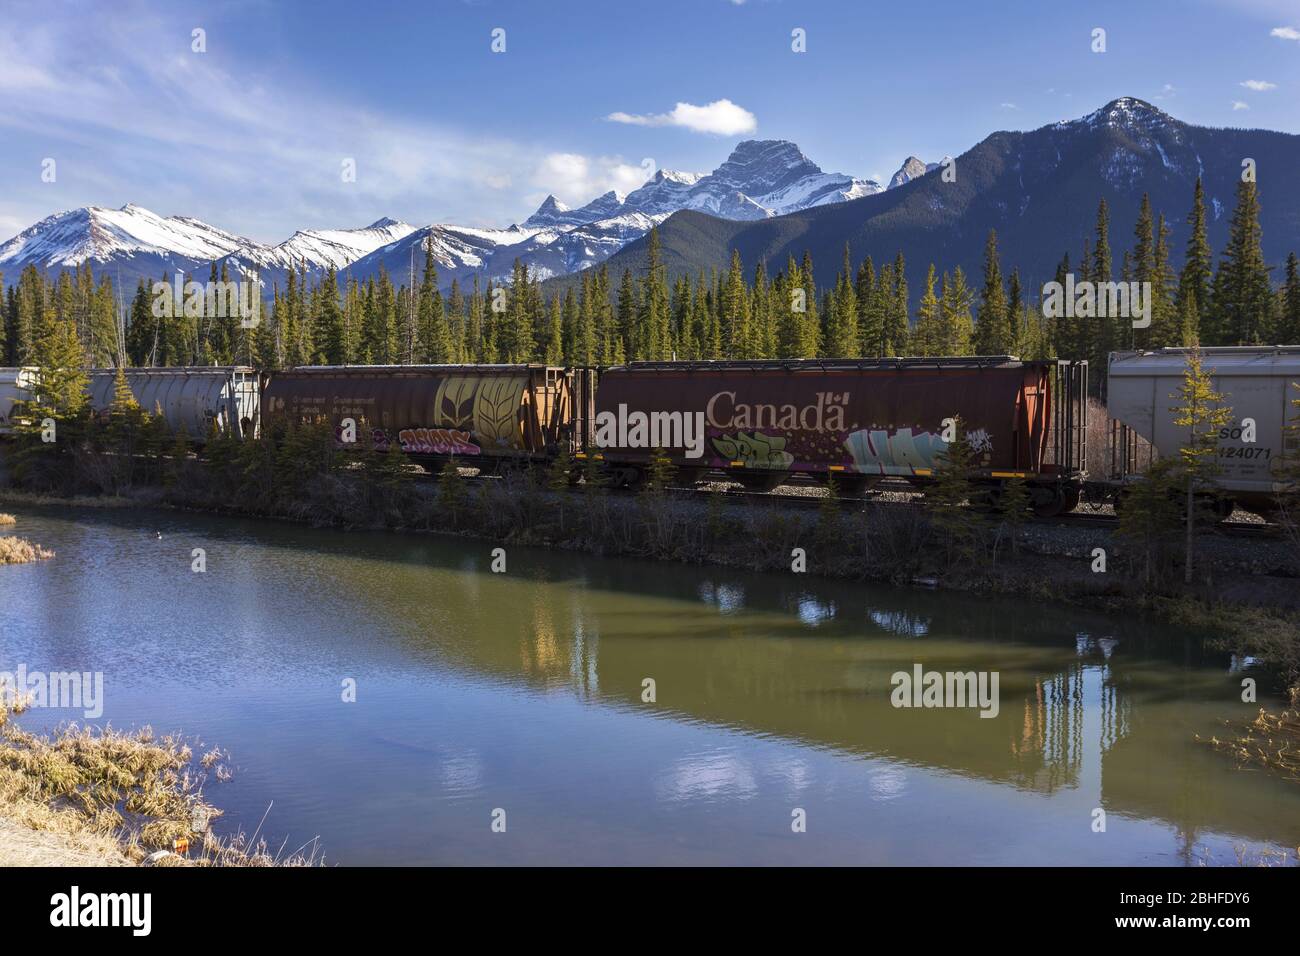 Canadian Pacific Freight Train Railway and Rocky Mountains Springtime Landscape in Bow Valley, Alberta Canada Stock Photo